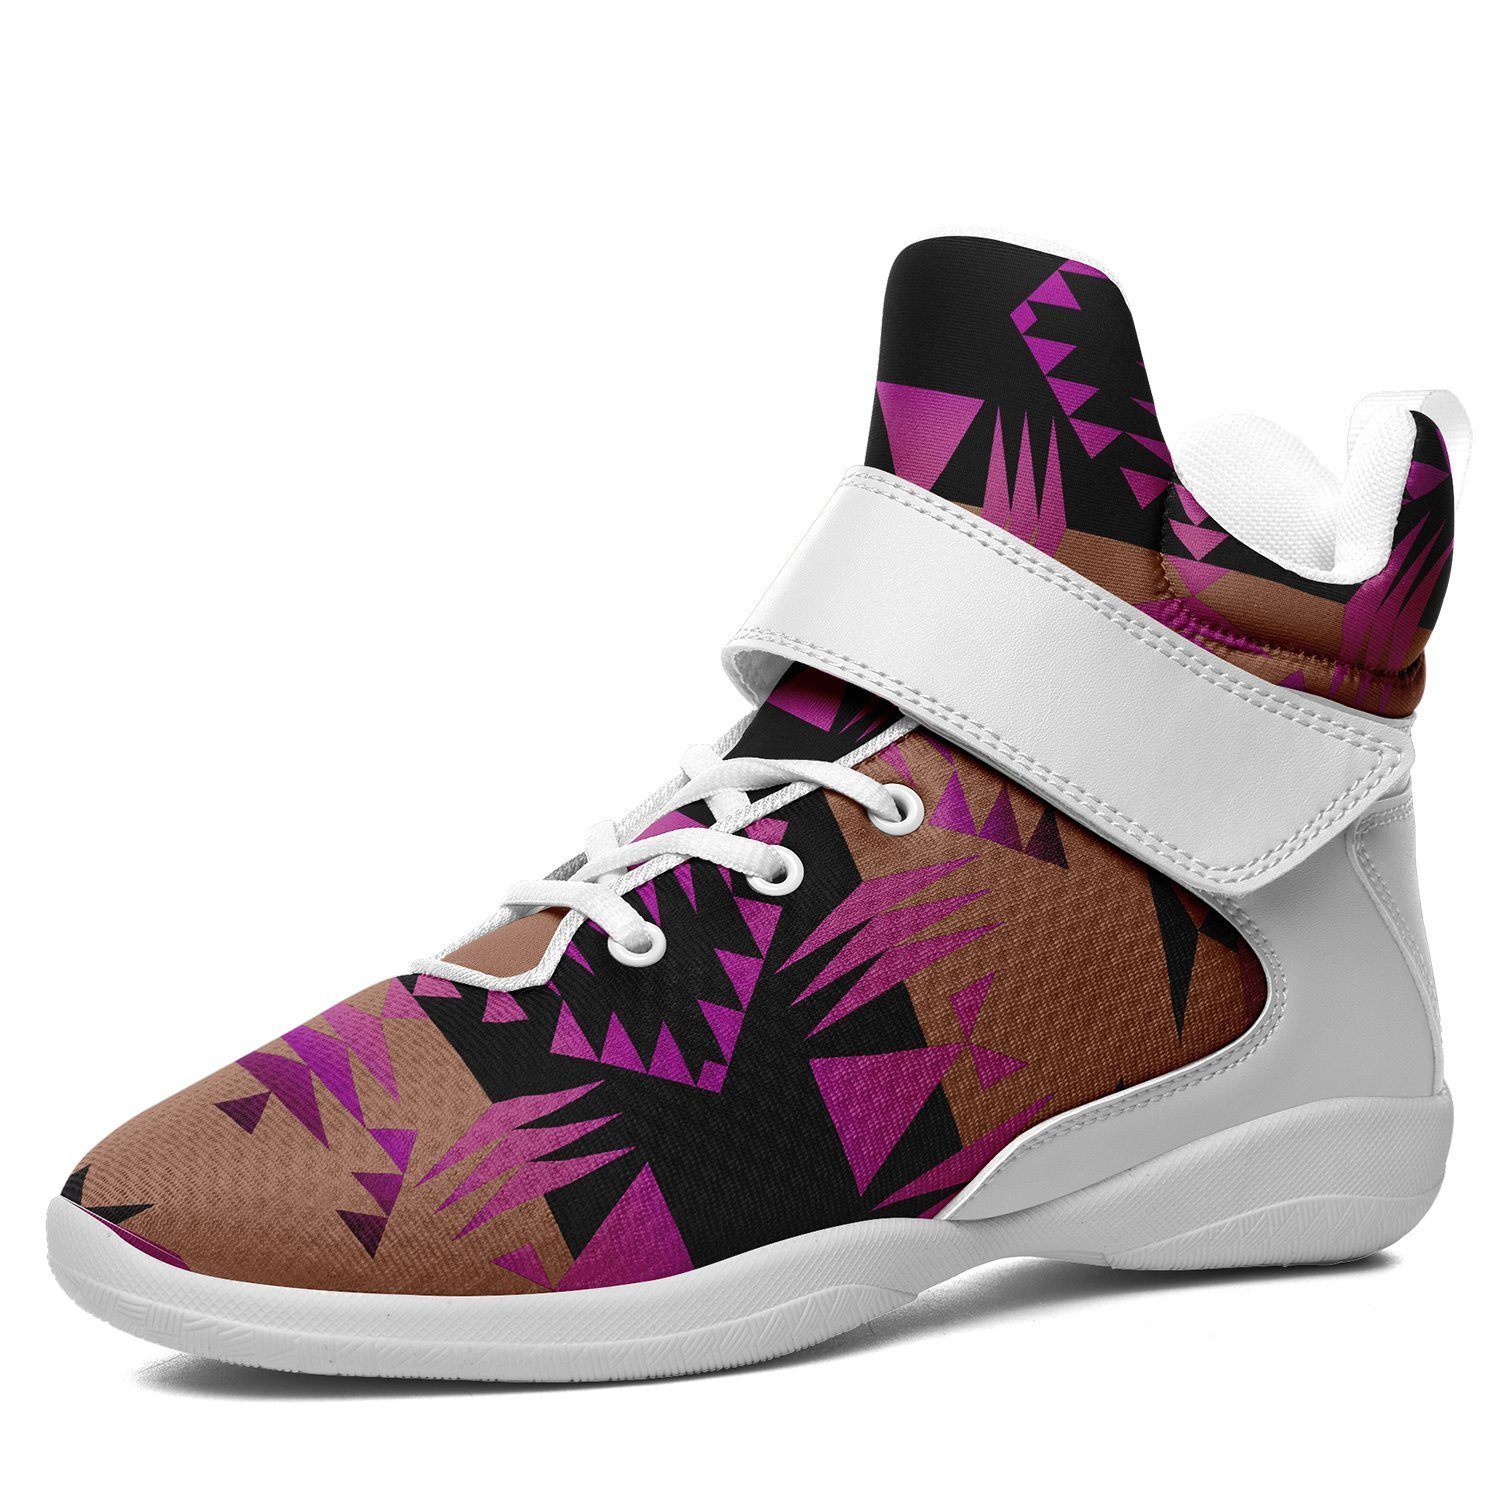 Between the Mountains Berry Ipottaa Basketball / Sport High Top Shoes - White Sole 49 Dzine US Men 7 / EUR 40 White Sole with White Strap 